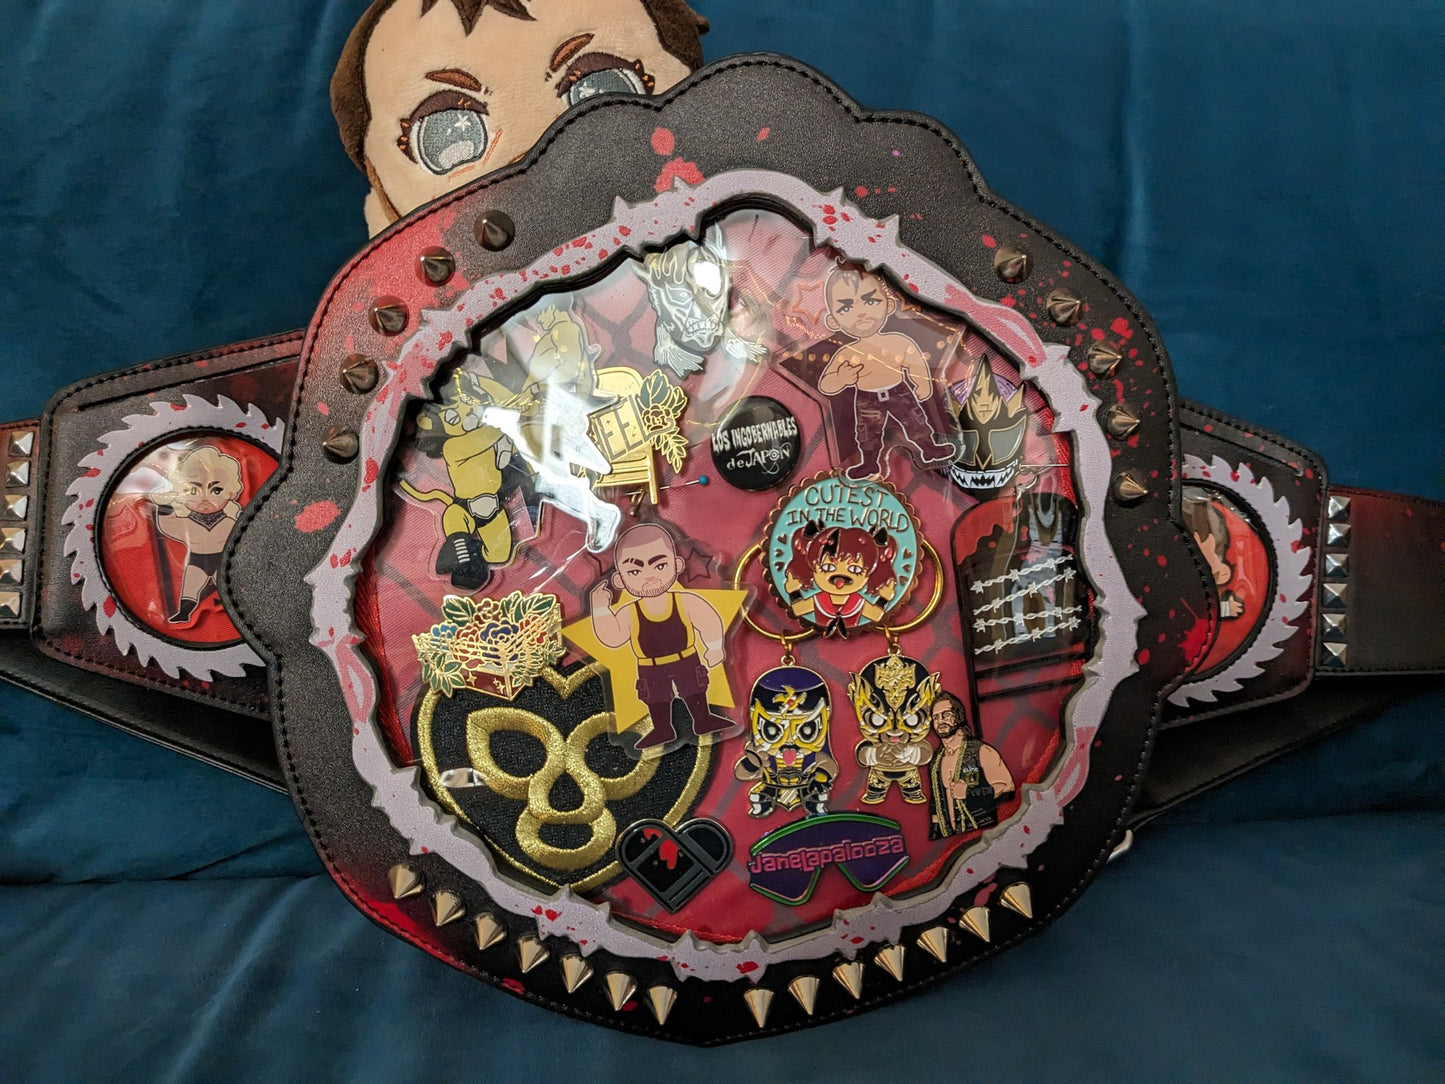 Pro Wrestling Hardcore Championship Ita Bag Fanny Pack (PREORDER, ships late March)